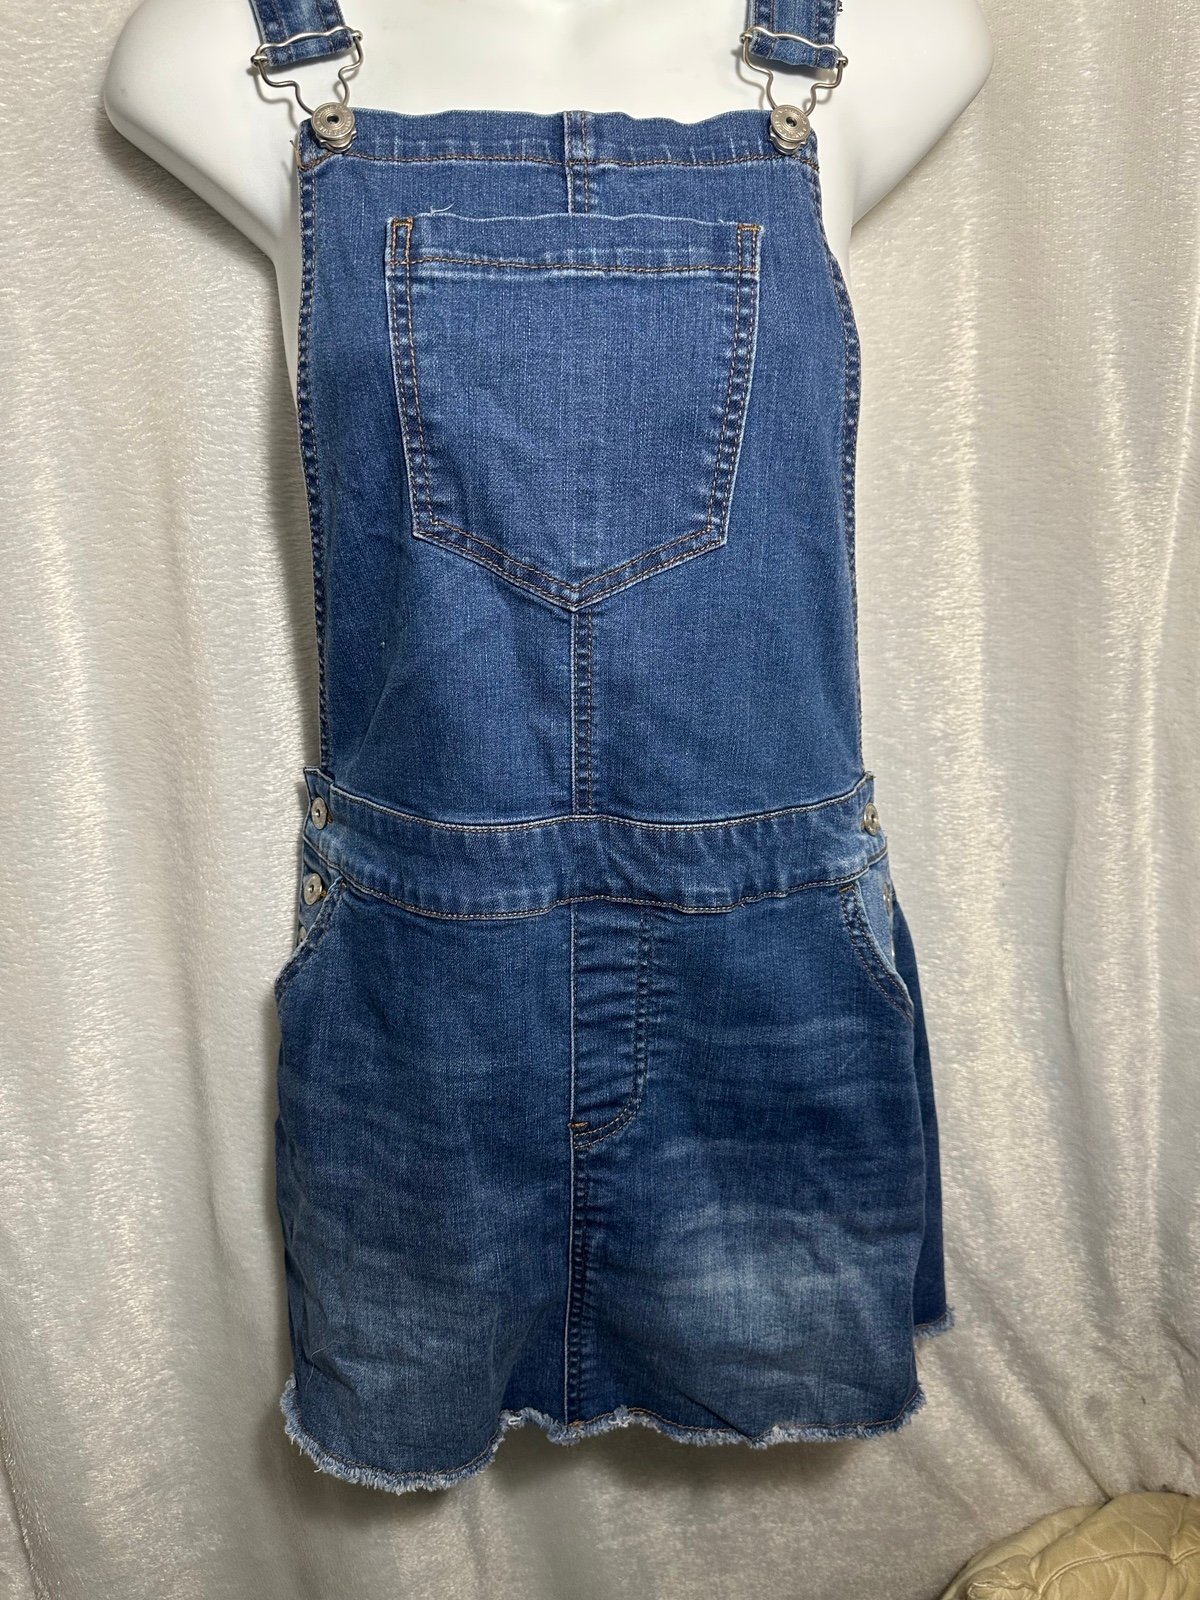 Classic Denim Overall Dress p0ZIXwEQy just for you